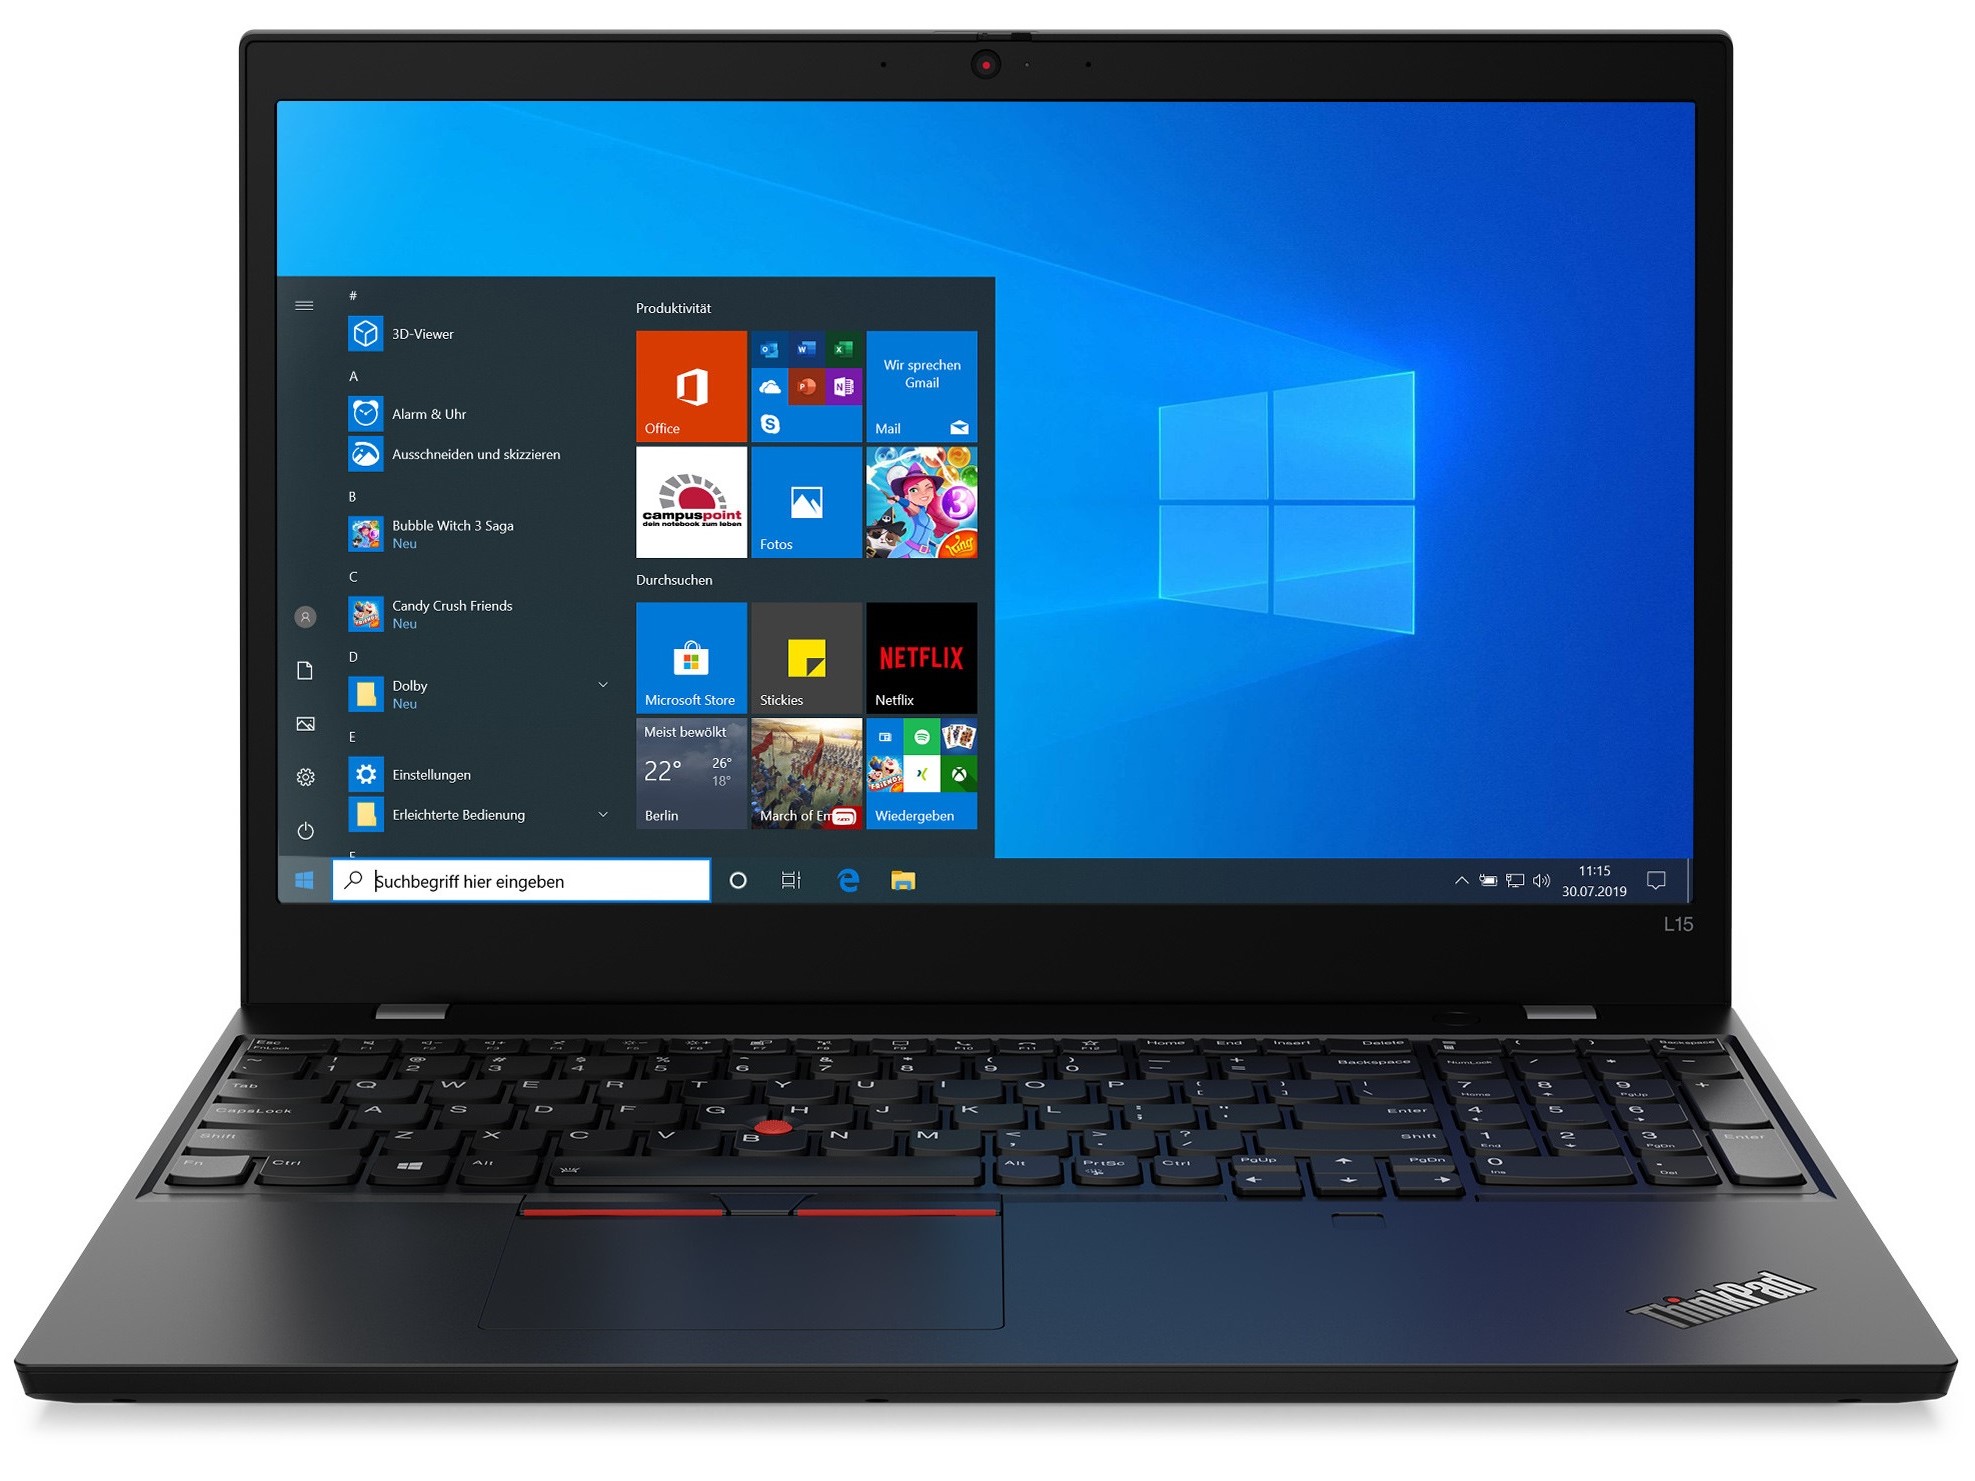 Lenovo Thinkpad L15 Gen 2 In Review Compelling Amd Laptop For Under 1 000 Euros Notebookcheck Net Reviews